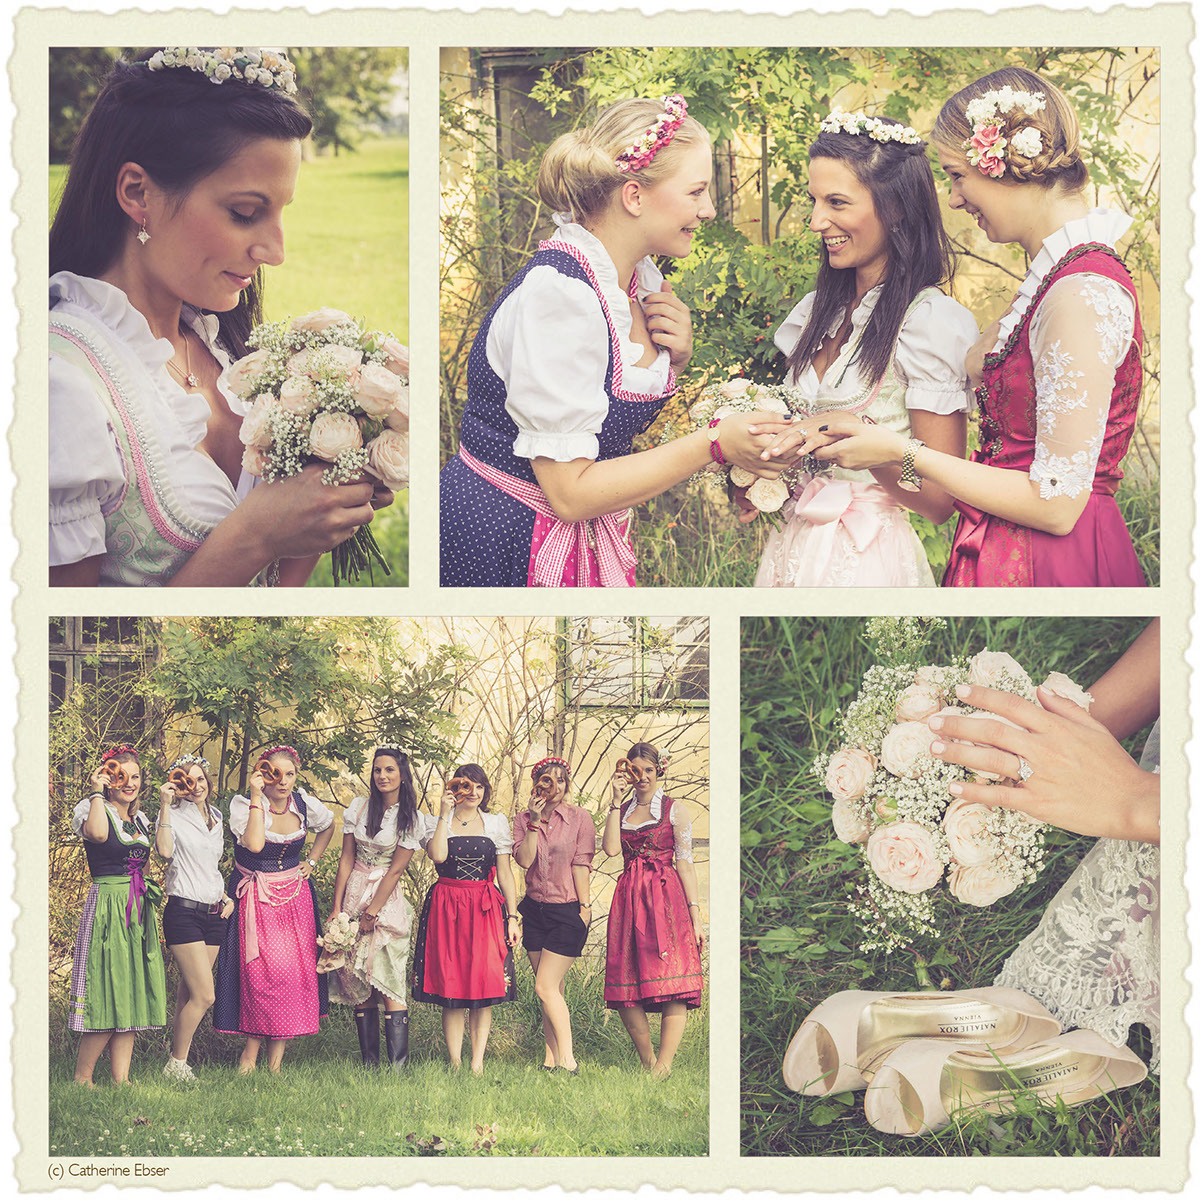 #photography #Fashion #traditional #dirndl #retouch #CreativeDirection